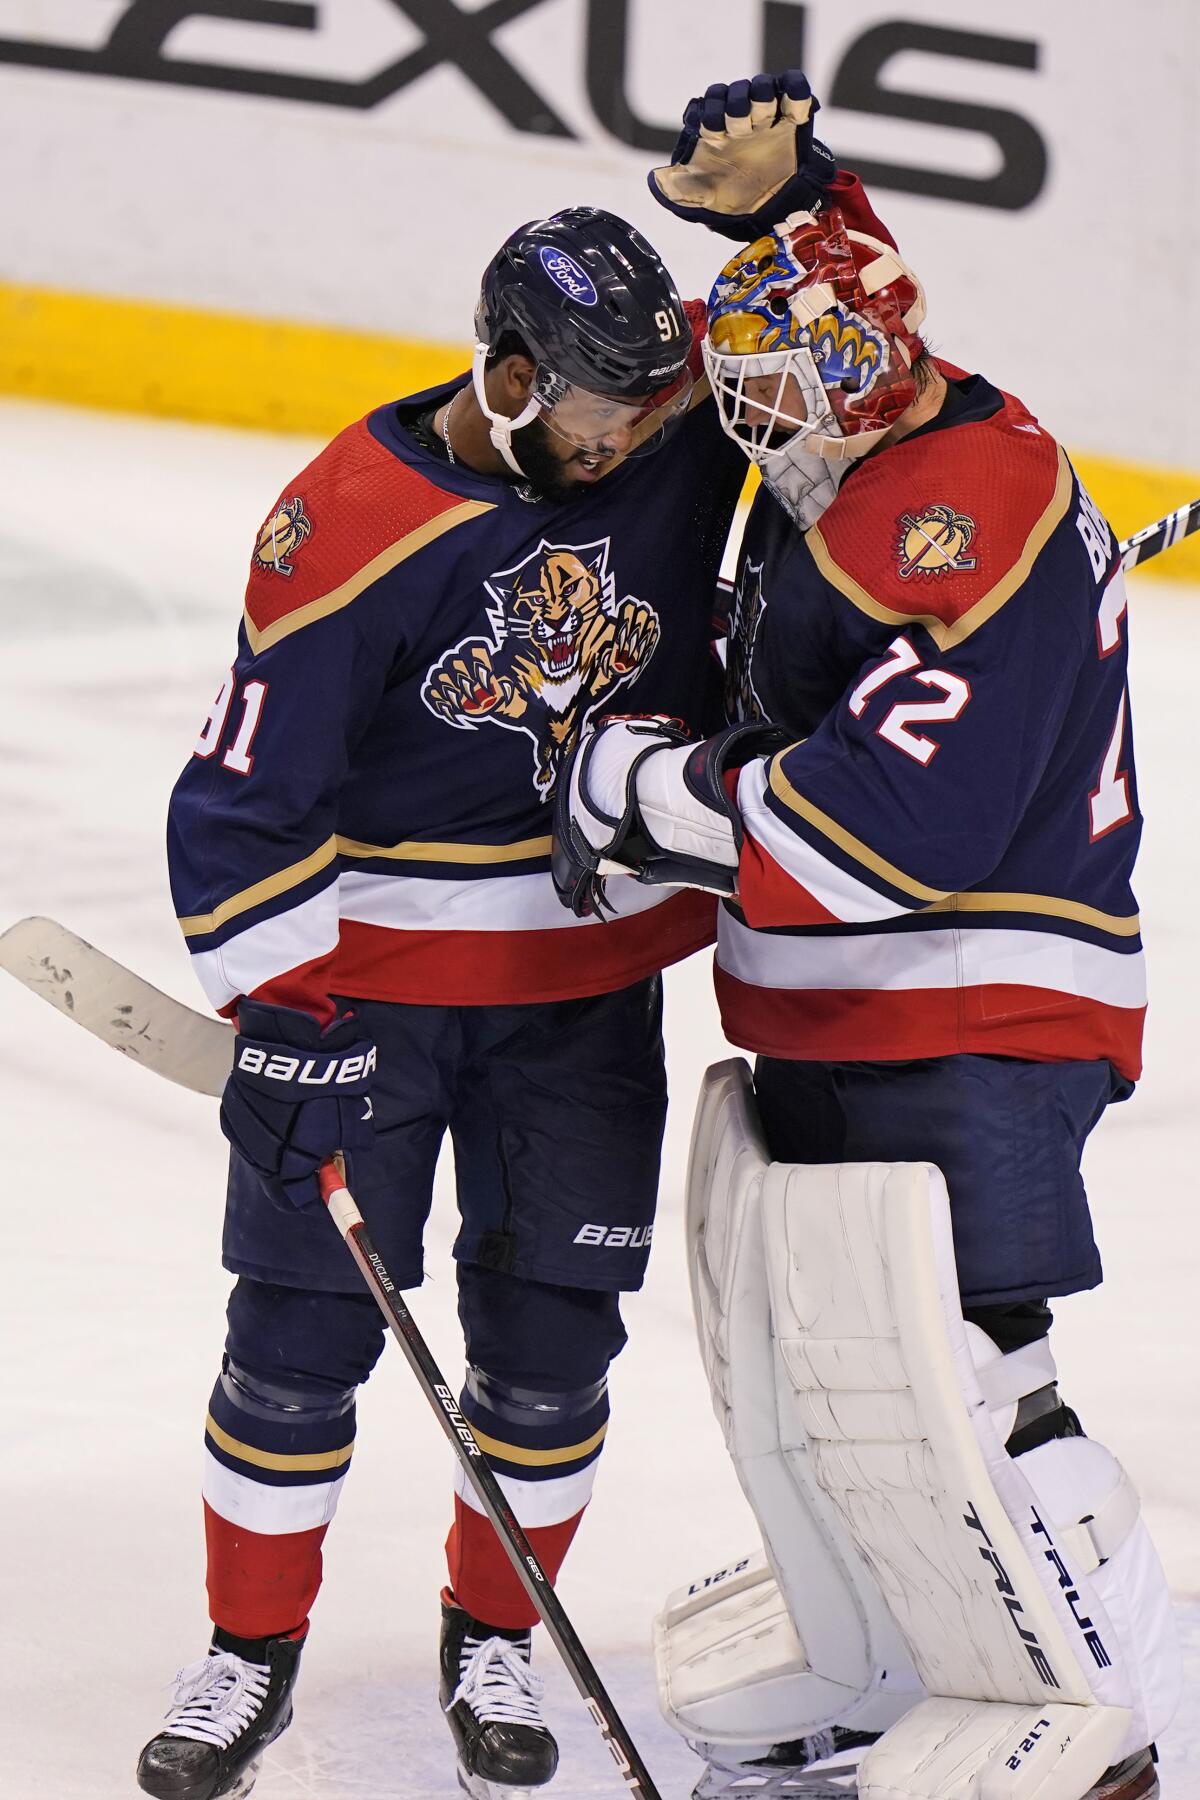 Florida Panthers goaltender Sergei Bobrovsky (72) and left wing Anthony Duclair (91) congratulate each other after the Panthers defeated the Chicago Blackhawks 4-2 in an NHL hockey game Saturday, March 13, 2021, in Sunrise, Fla. (AP Photo/Wilfredo Lee)